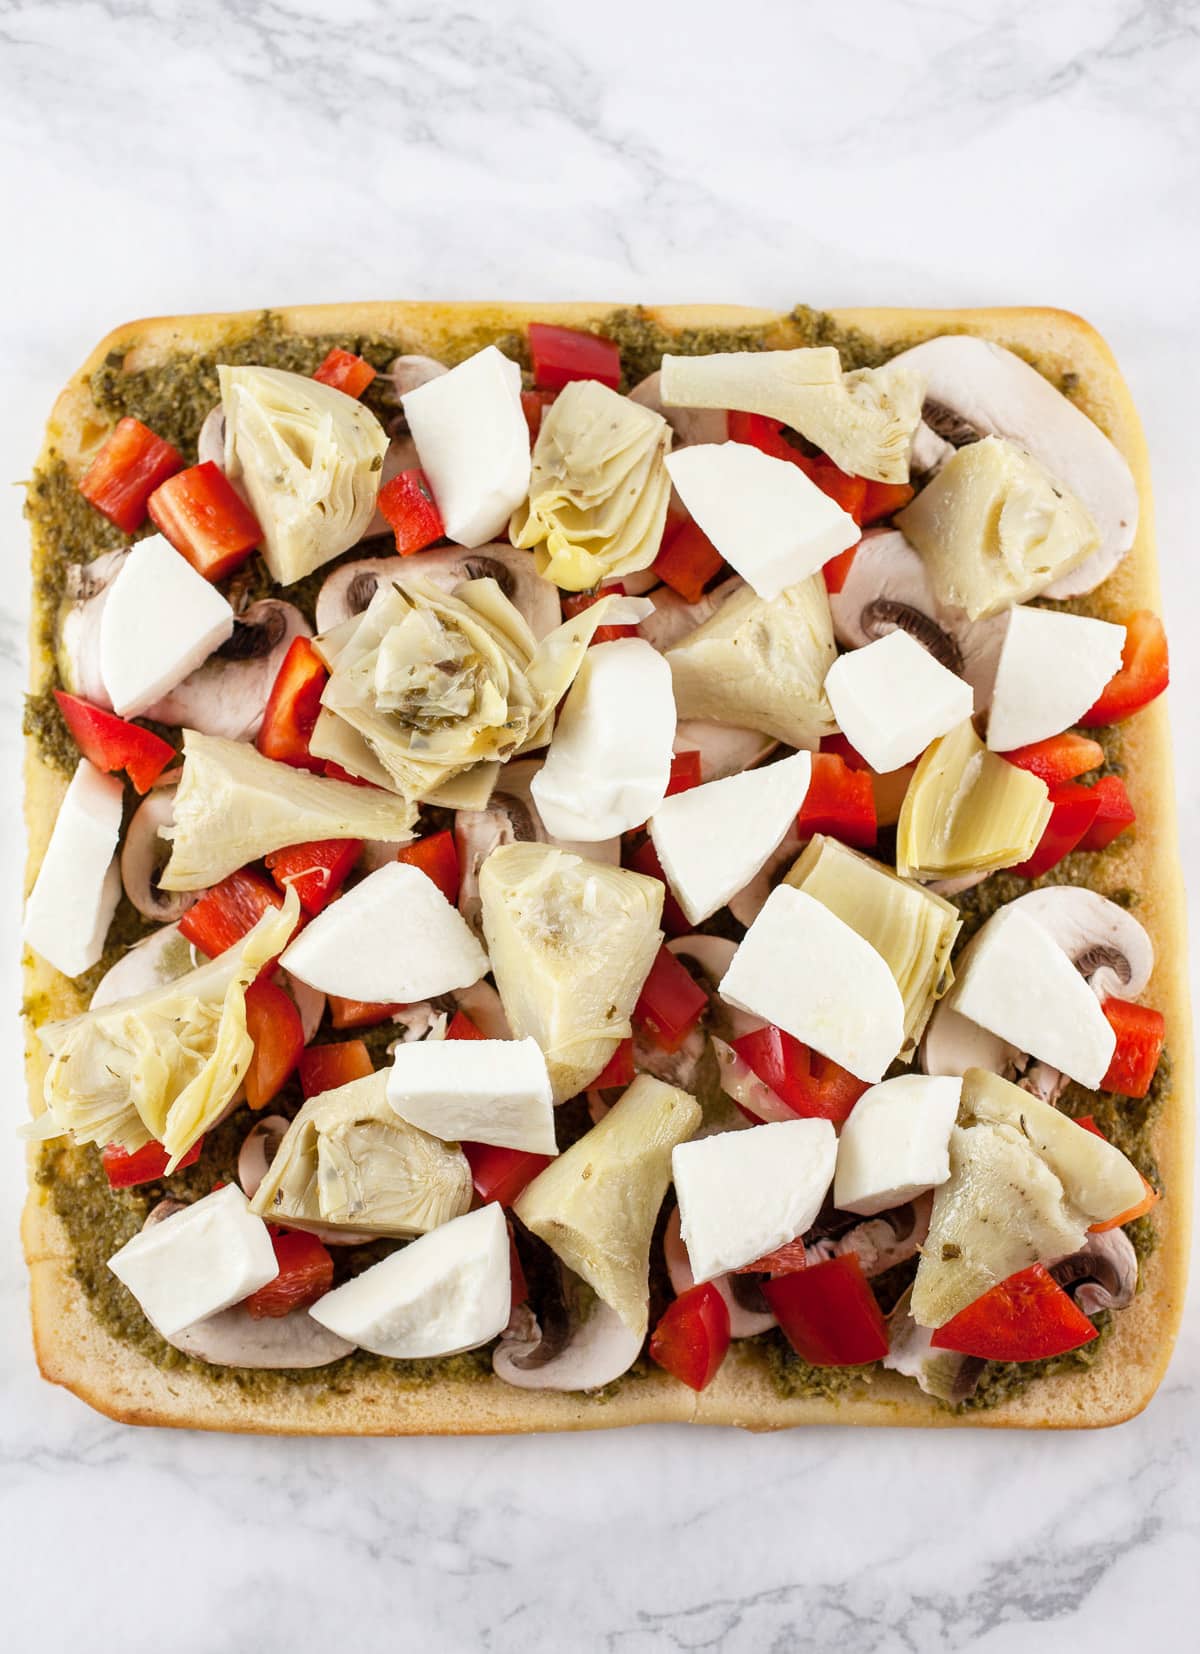 Pesto, red bell peppers, mushrooms, artichokes, and mozzarella cheese on uncooked flatbread.